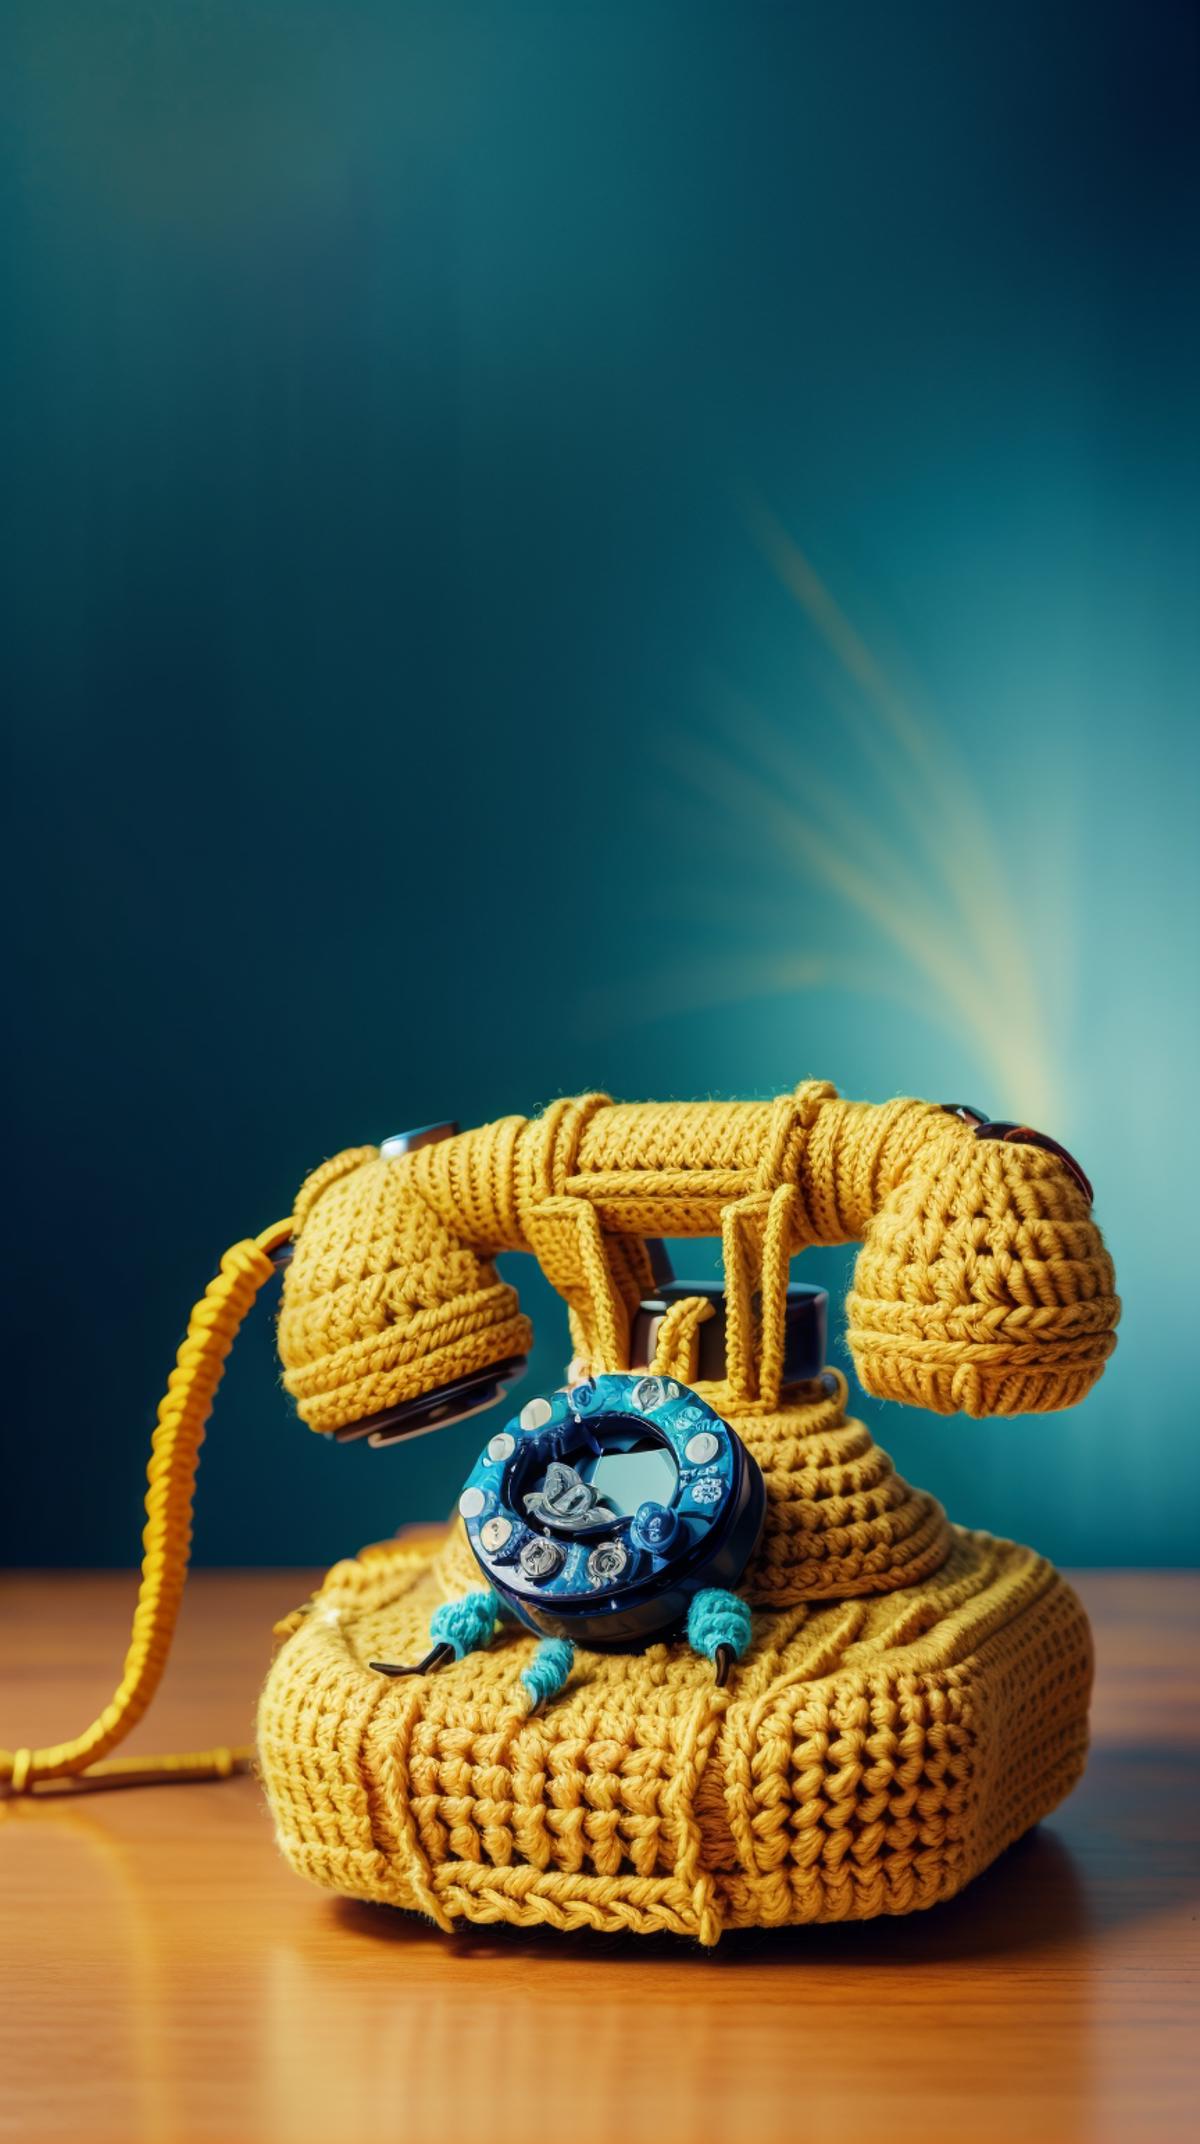 World of Crochet image by mnemic